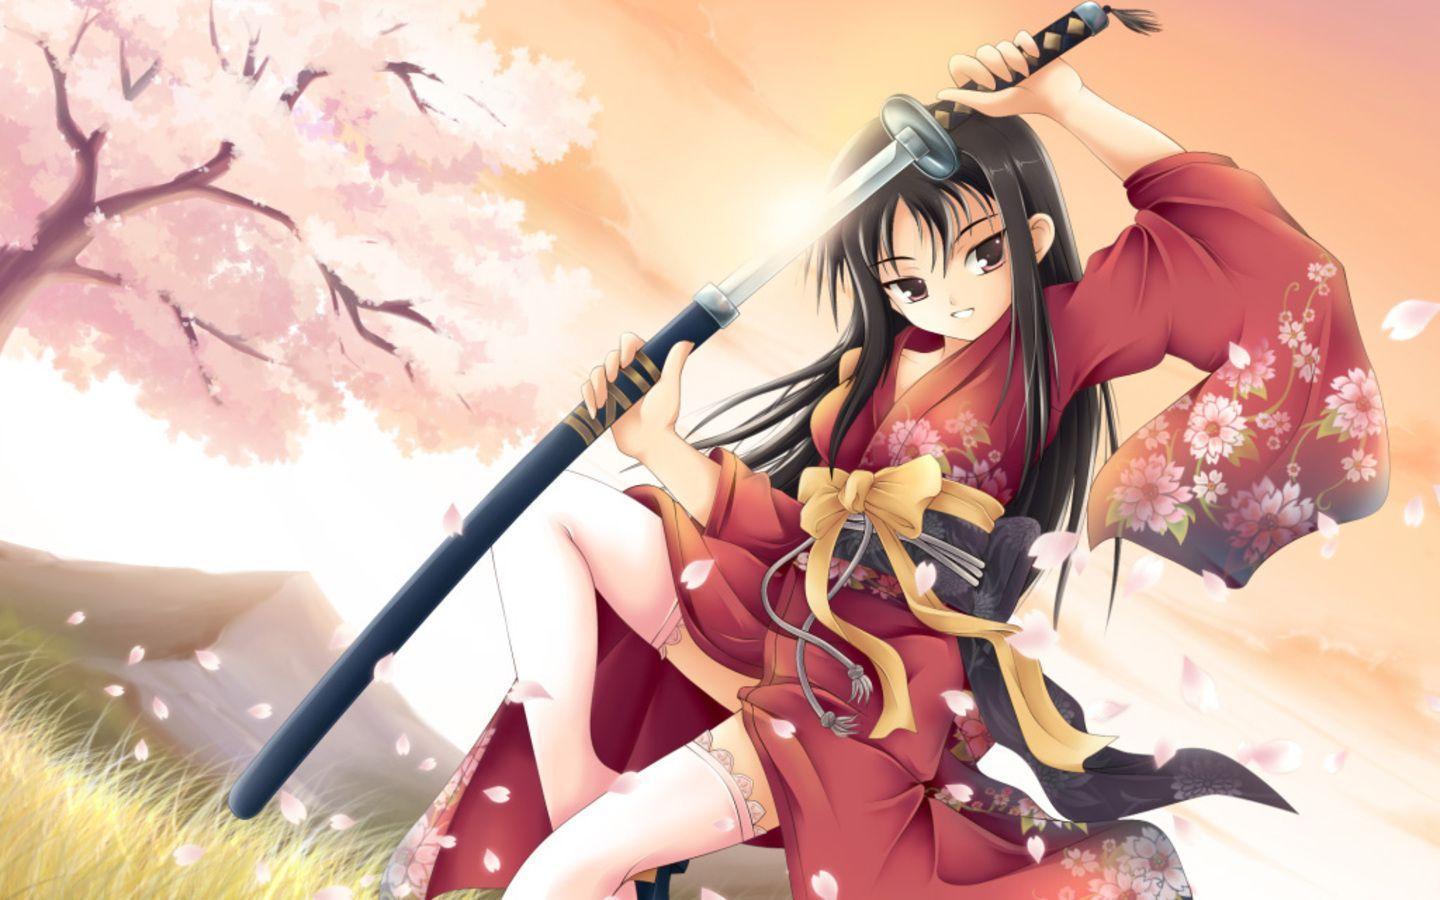 Anime Sword Wallpaper, image collections of wallpaper